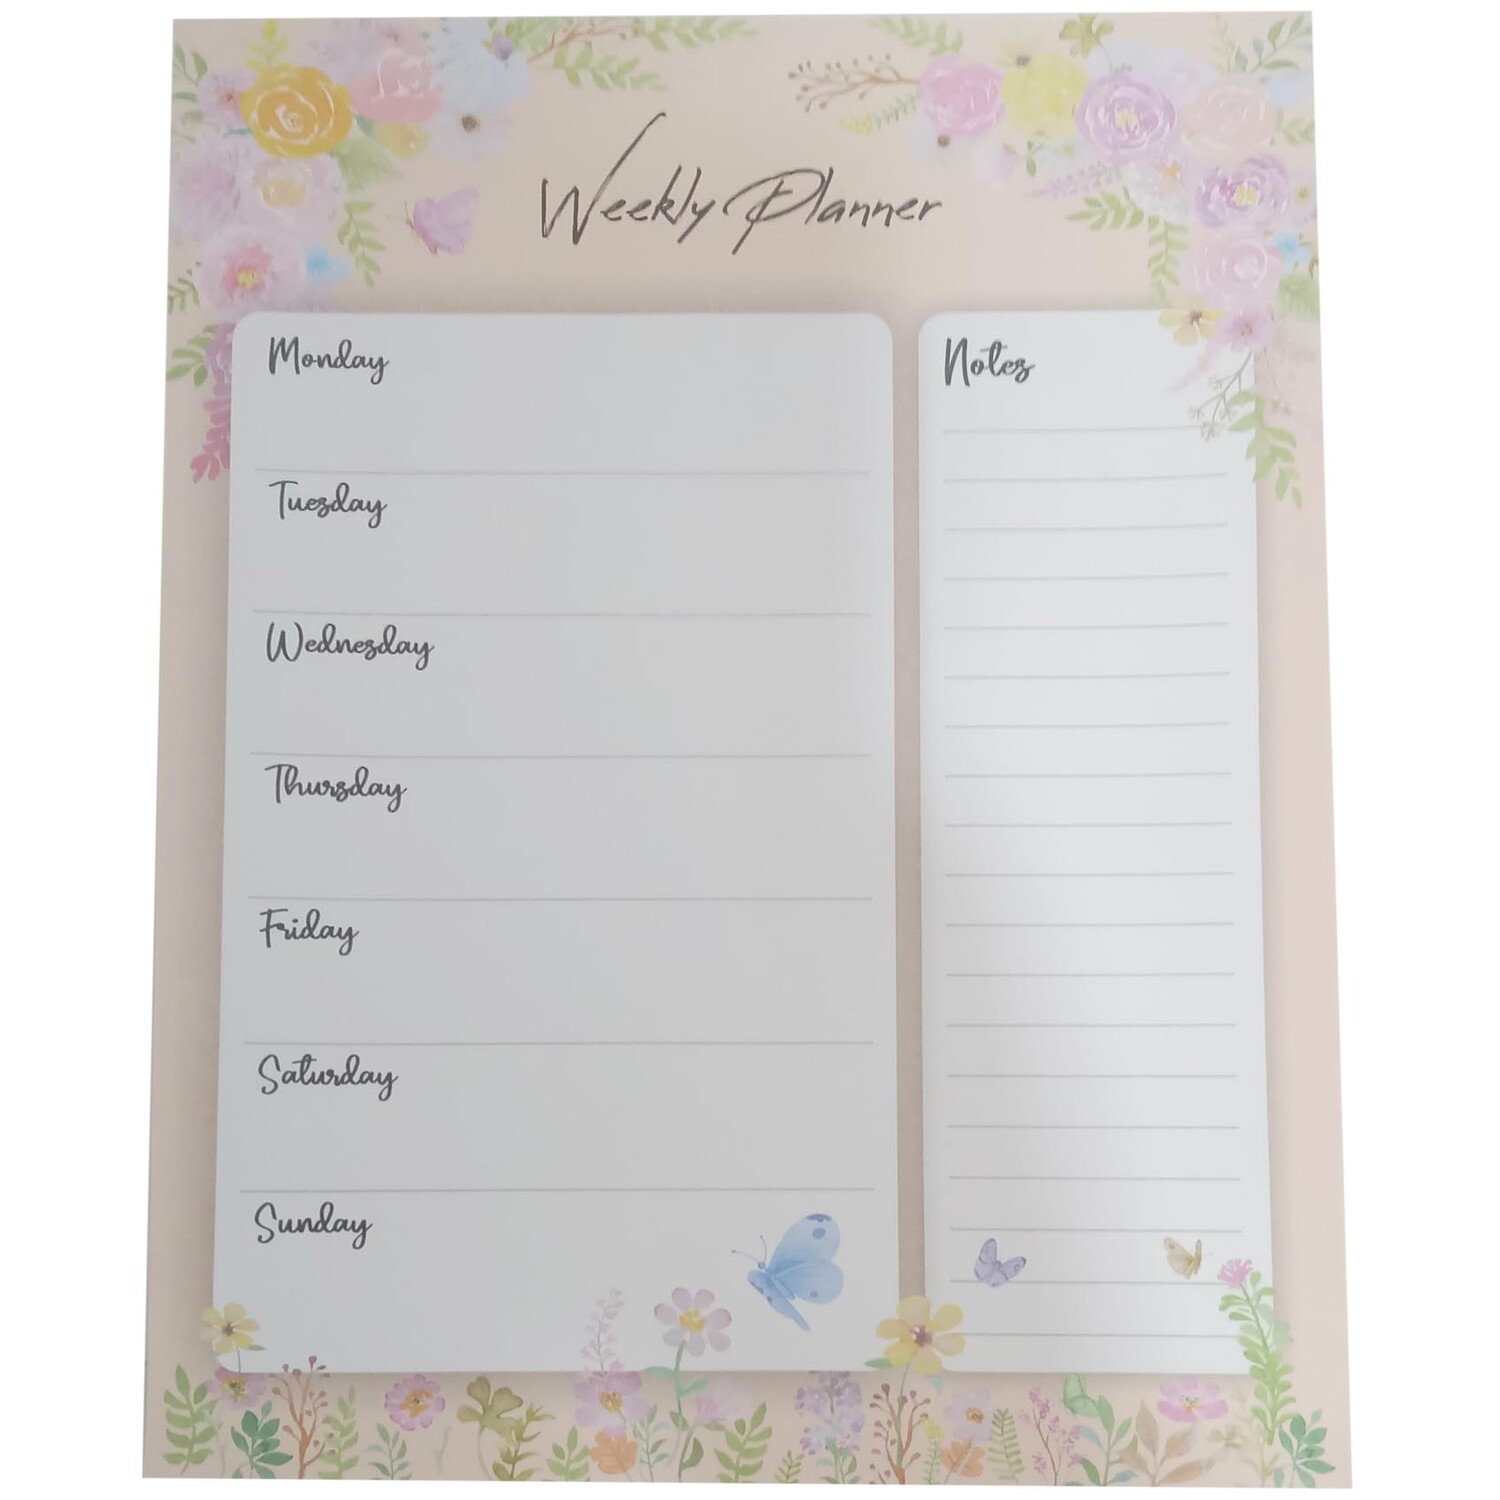 Weekly Planner A5 Image 4